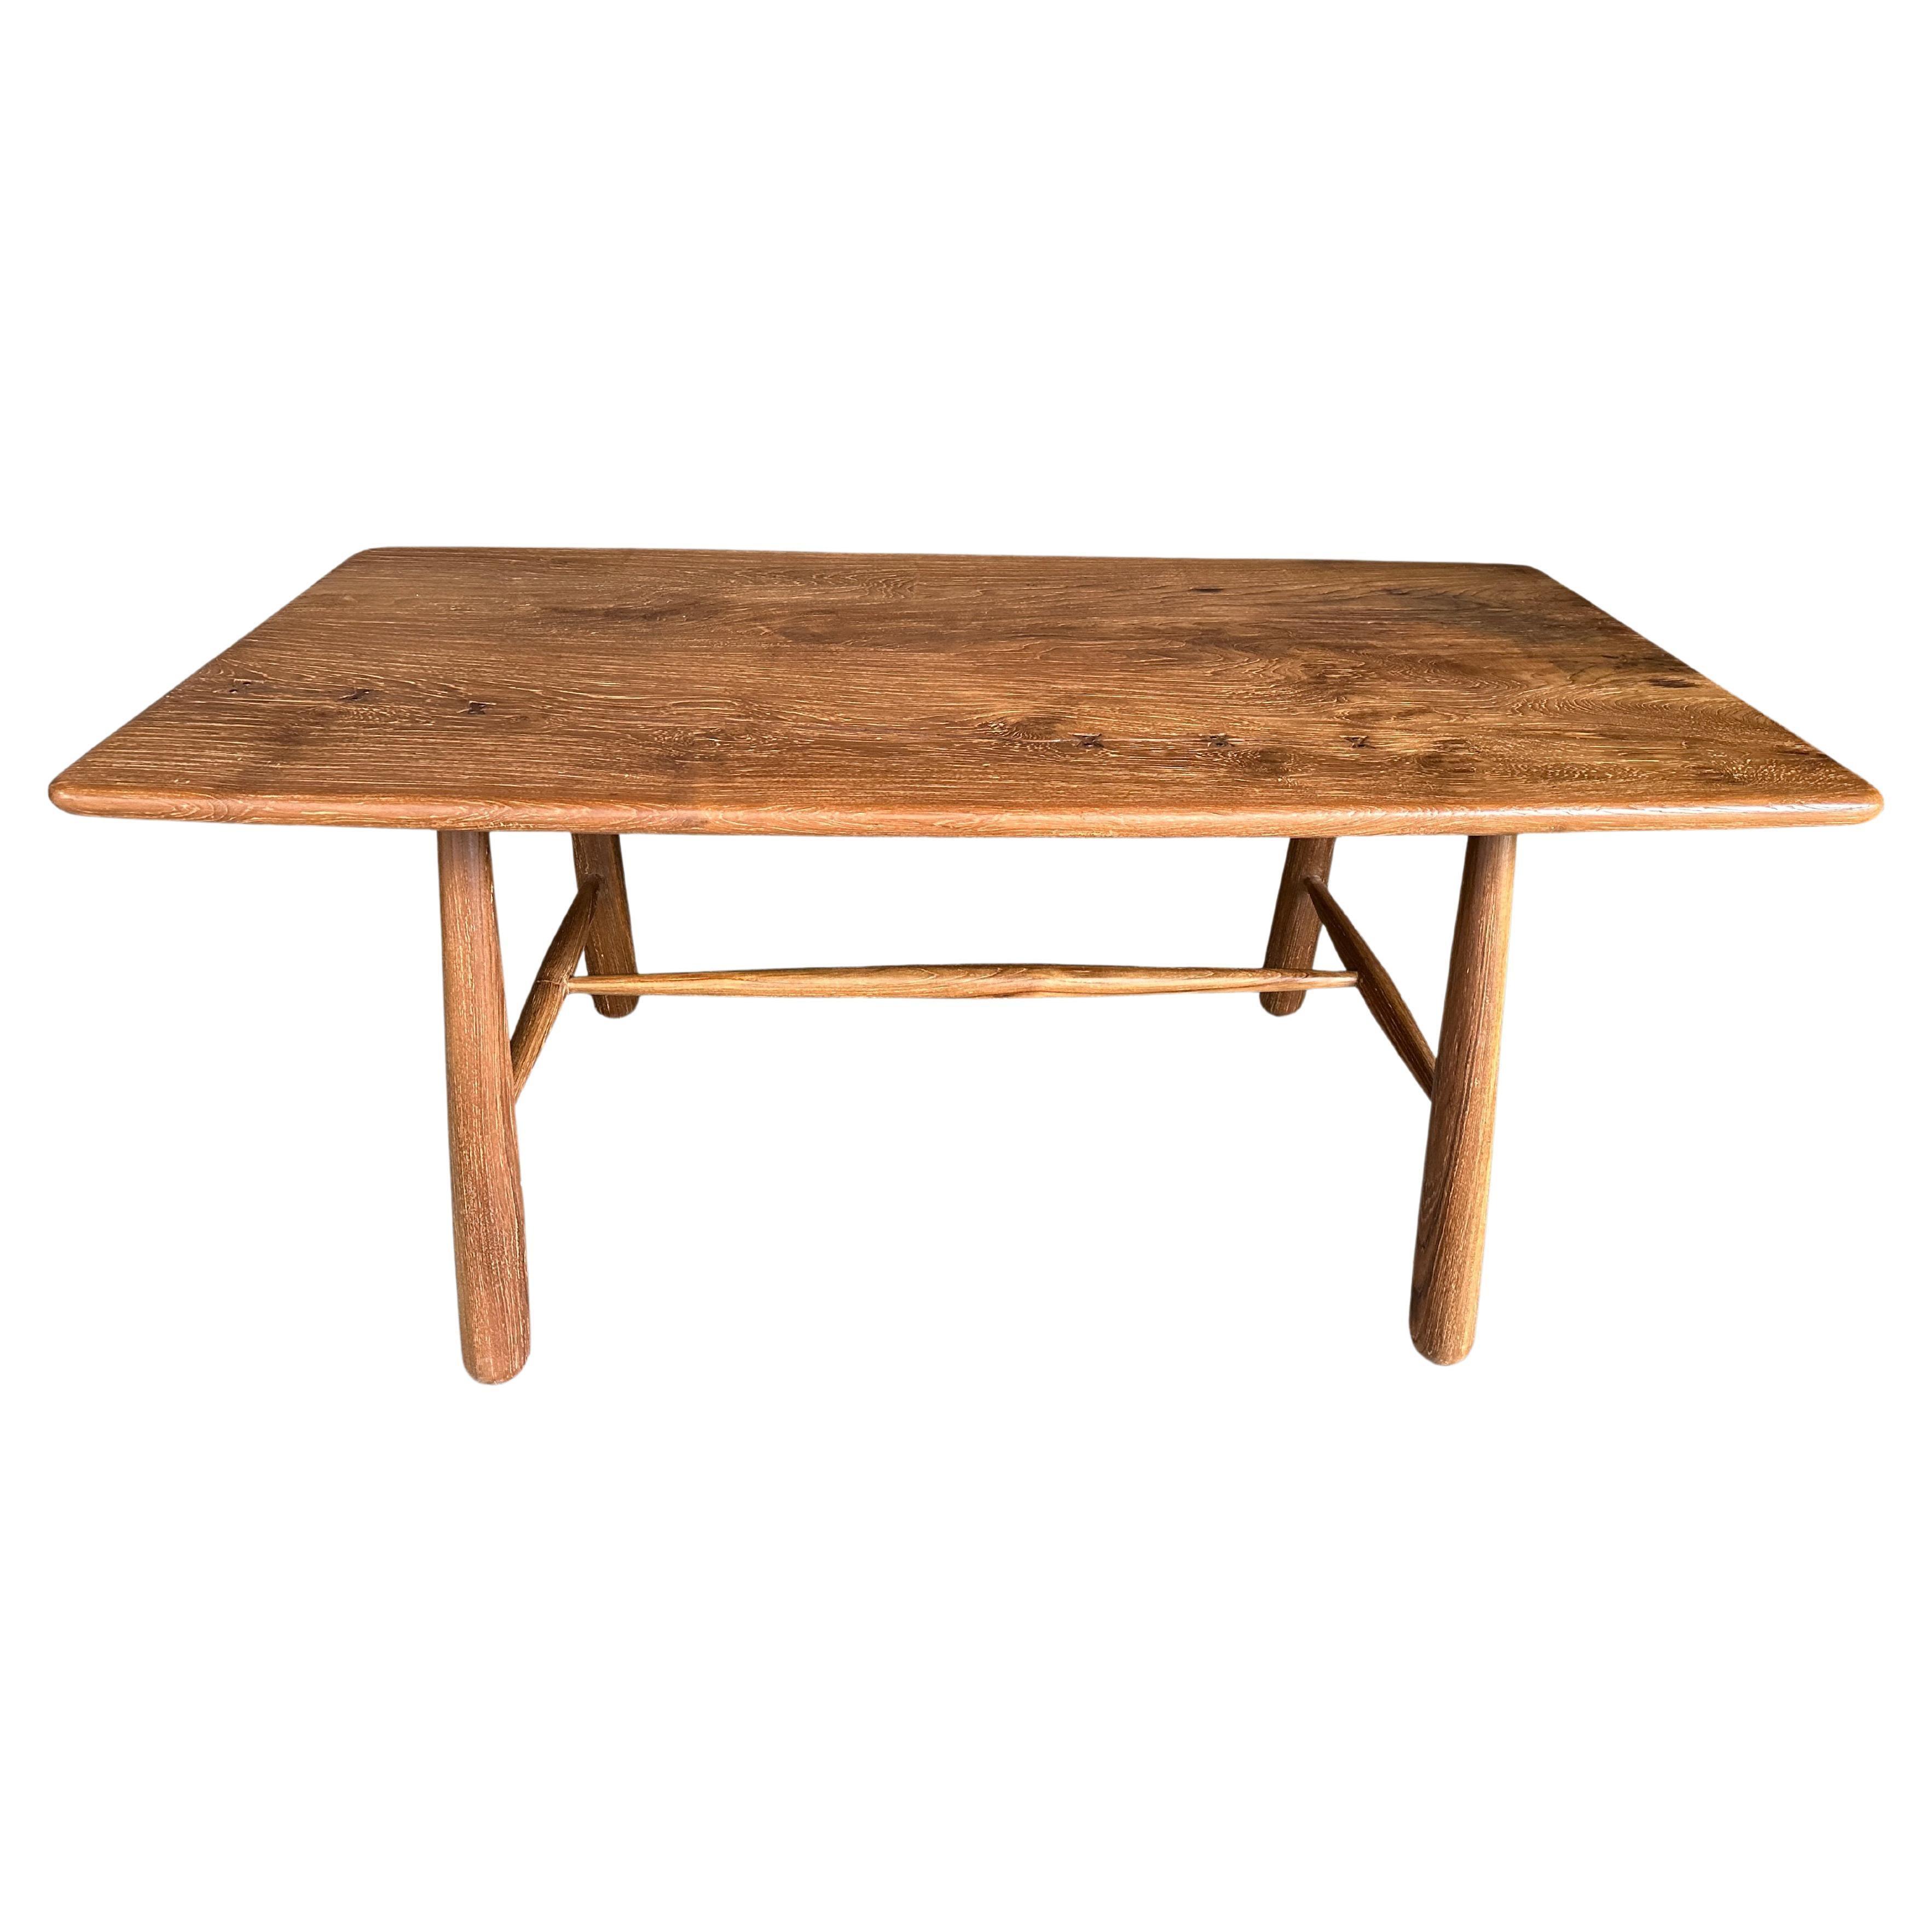 Midcentury Couture Teak Wood Dining Table or Desk